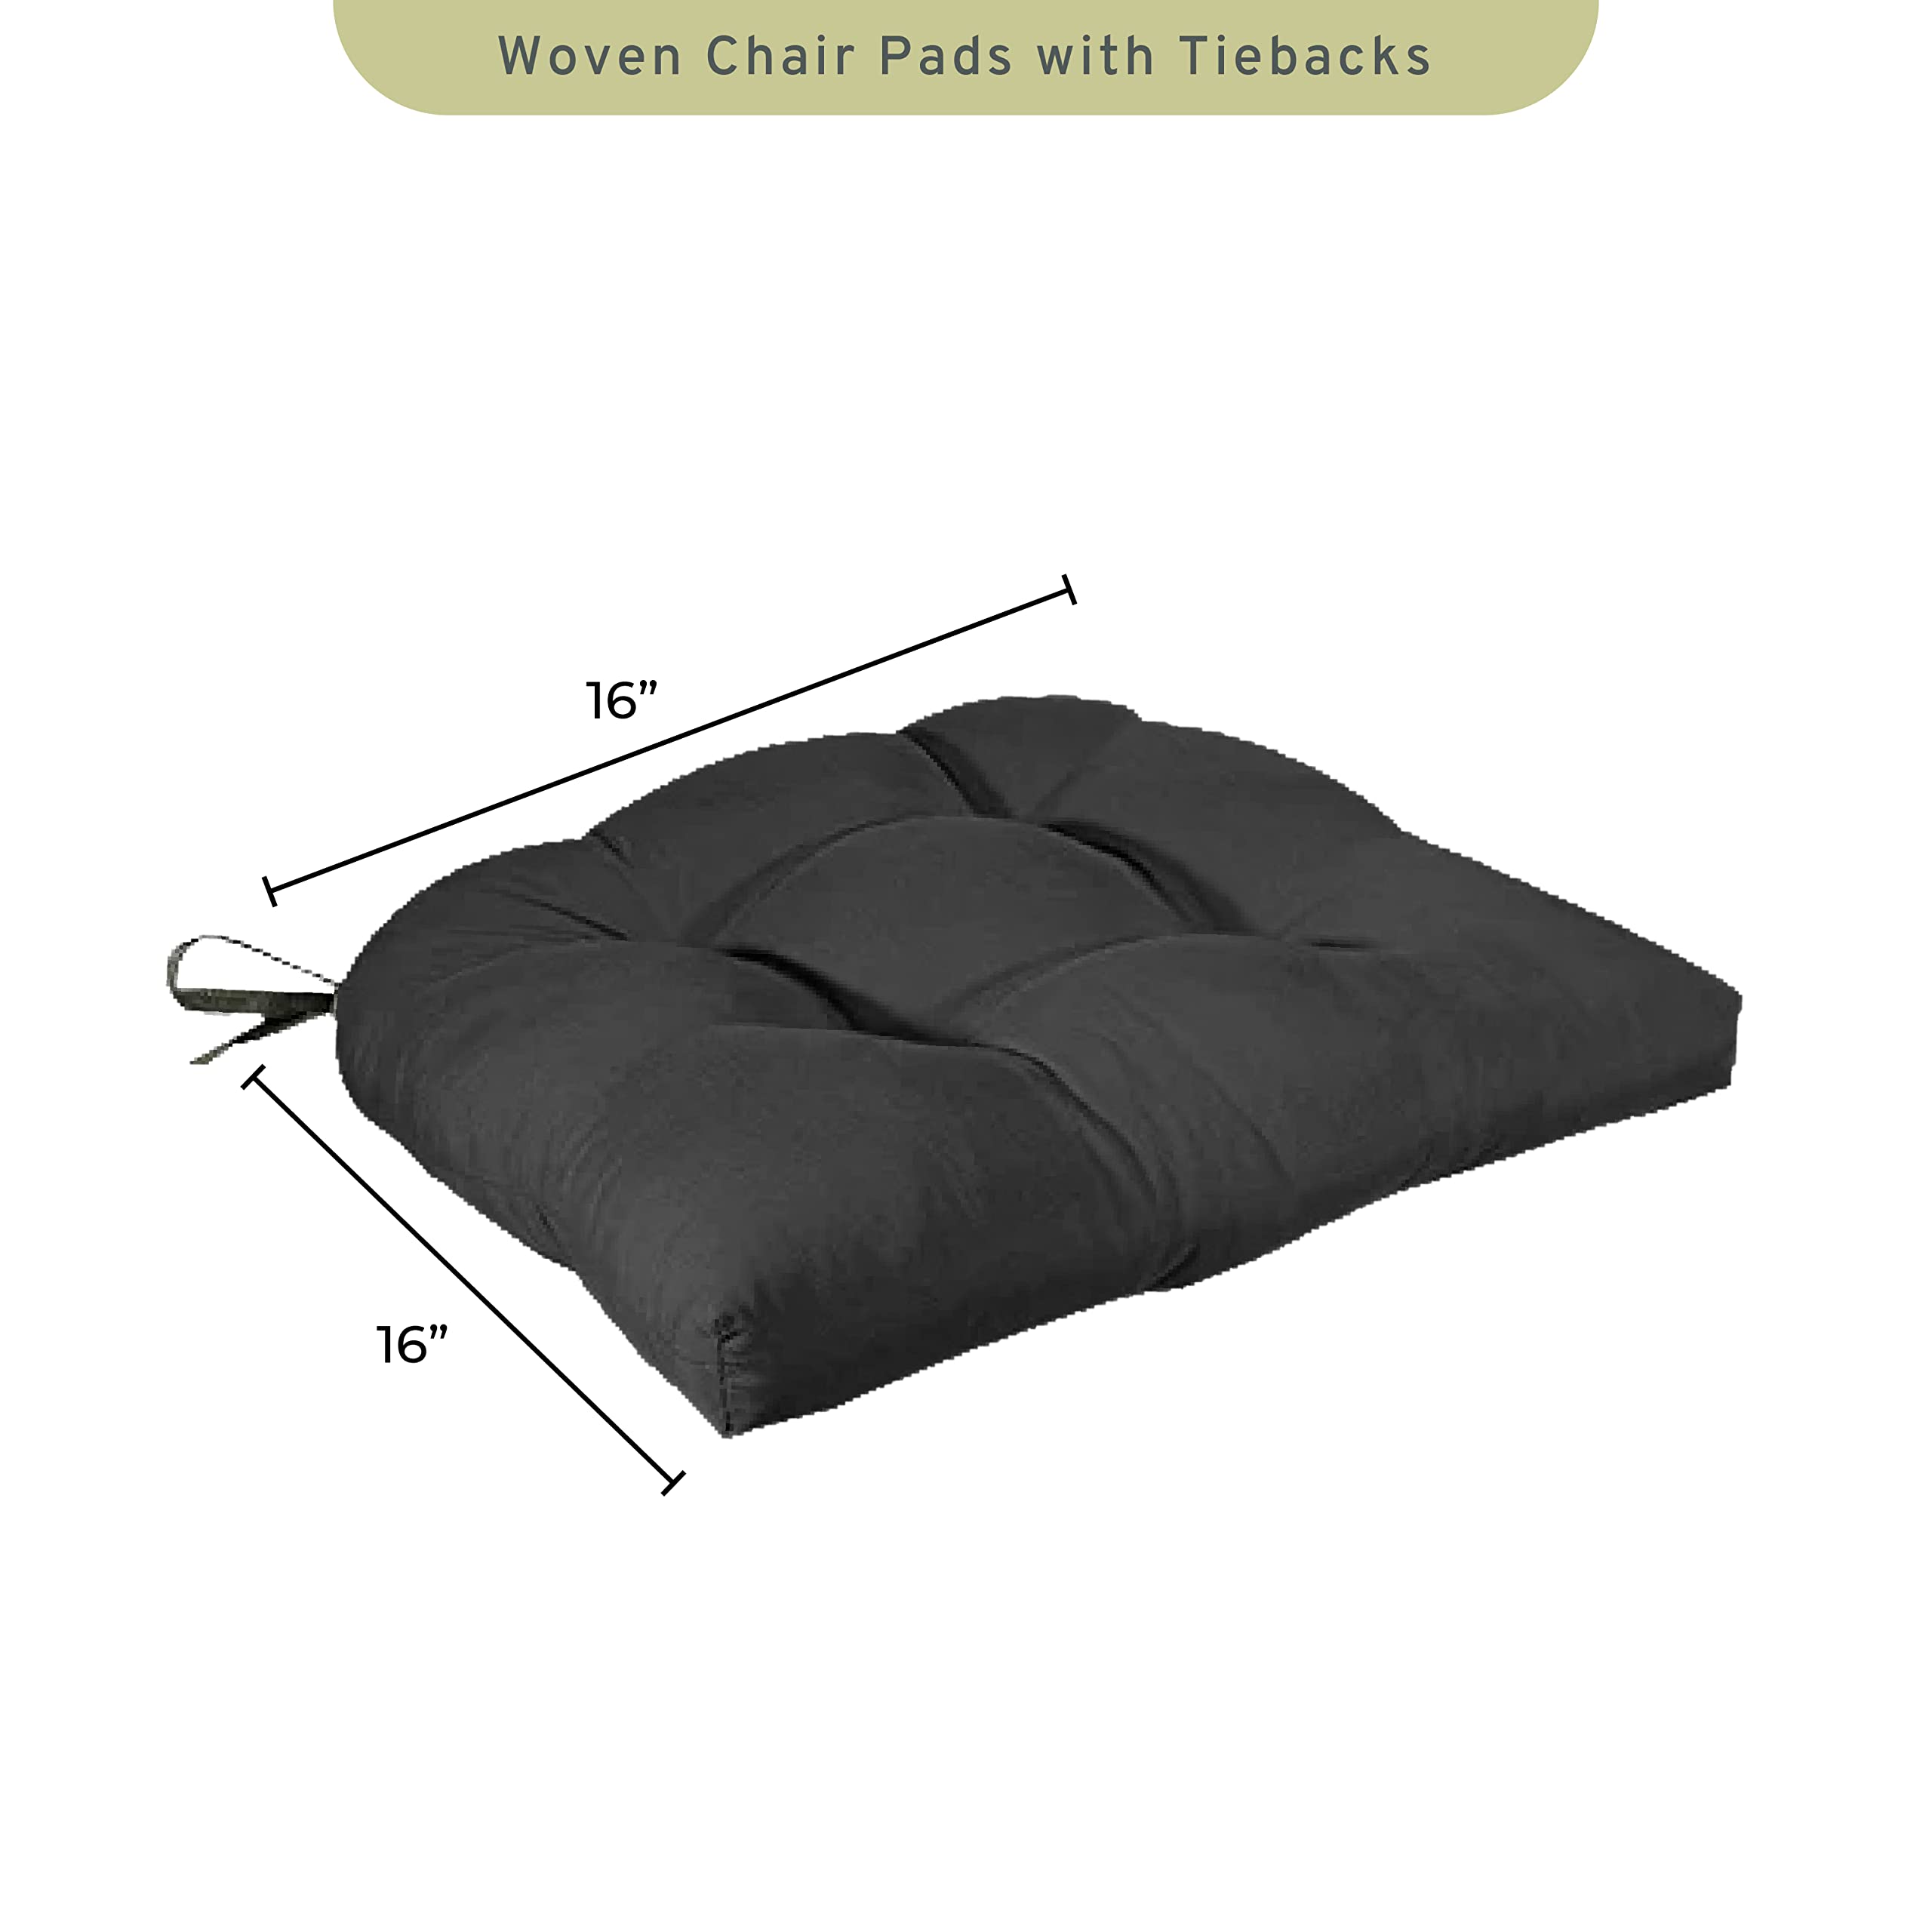 Arlee Home Fashions – Fiber Filled Premium Chair Pads - Chair Pads with Tiebacks –17.25” L X 16” W – Black - Set of 4